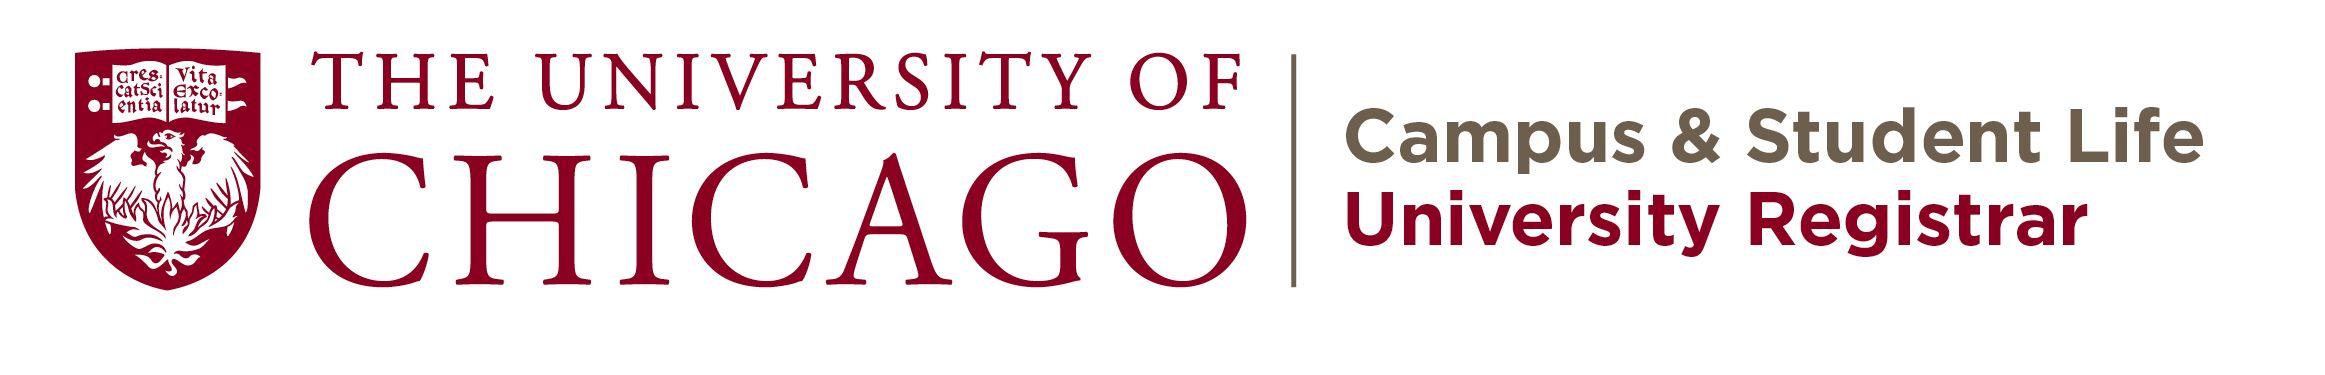 University of Chicago Logo - Campus and Student Life Identity Guidelines | Campus & Student Life